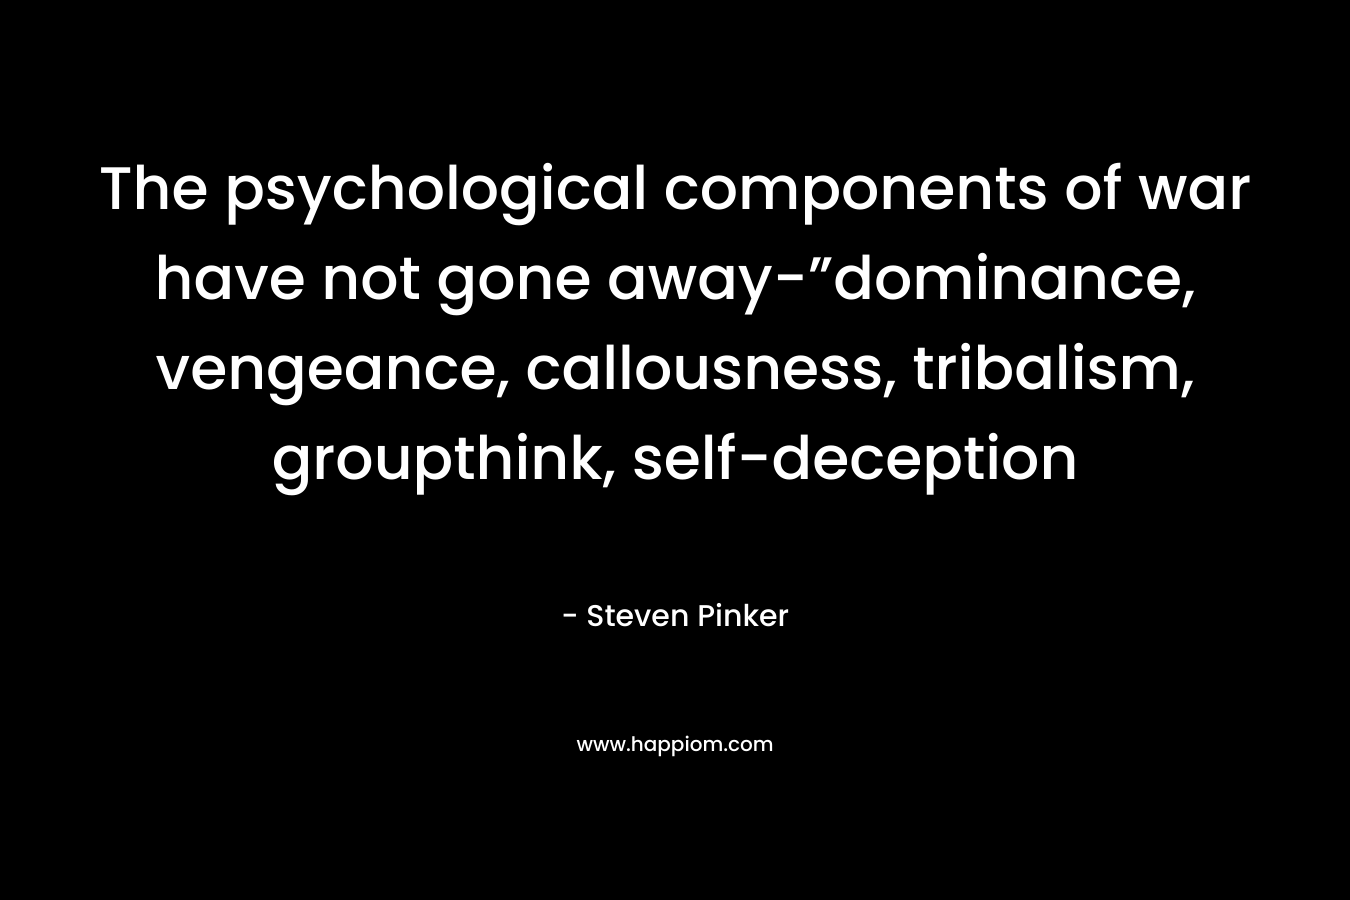 The psychological components of war have not gone away-”dominance, vengeance, callousness, tribalism, groupthink, self-deception